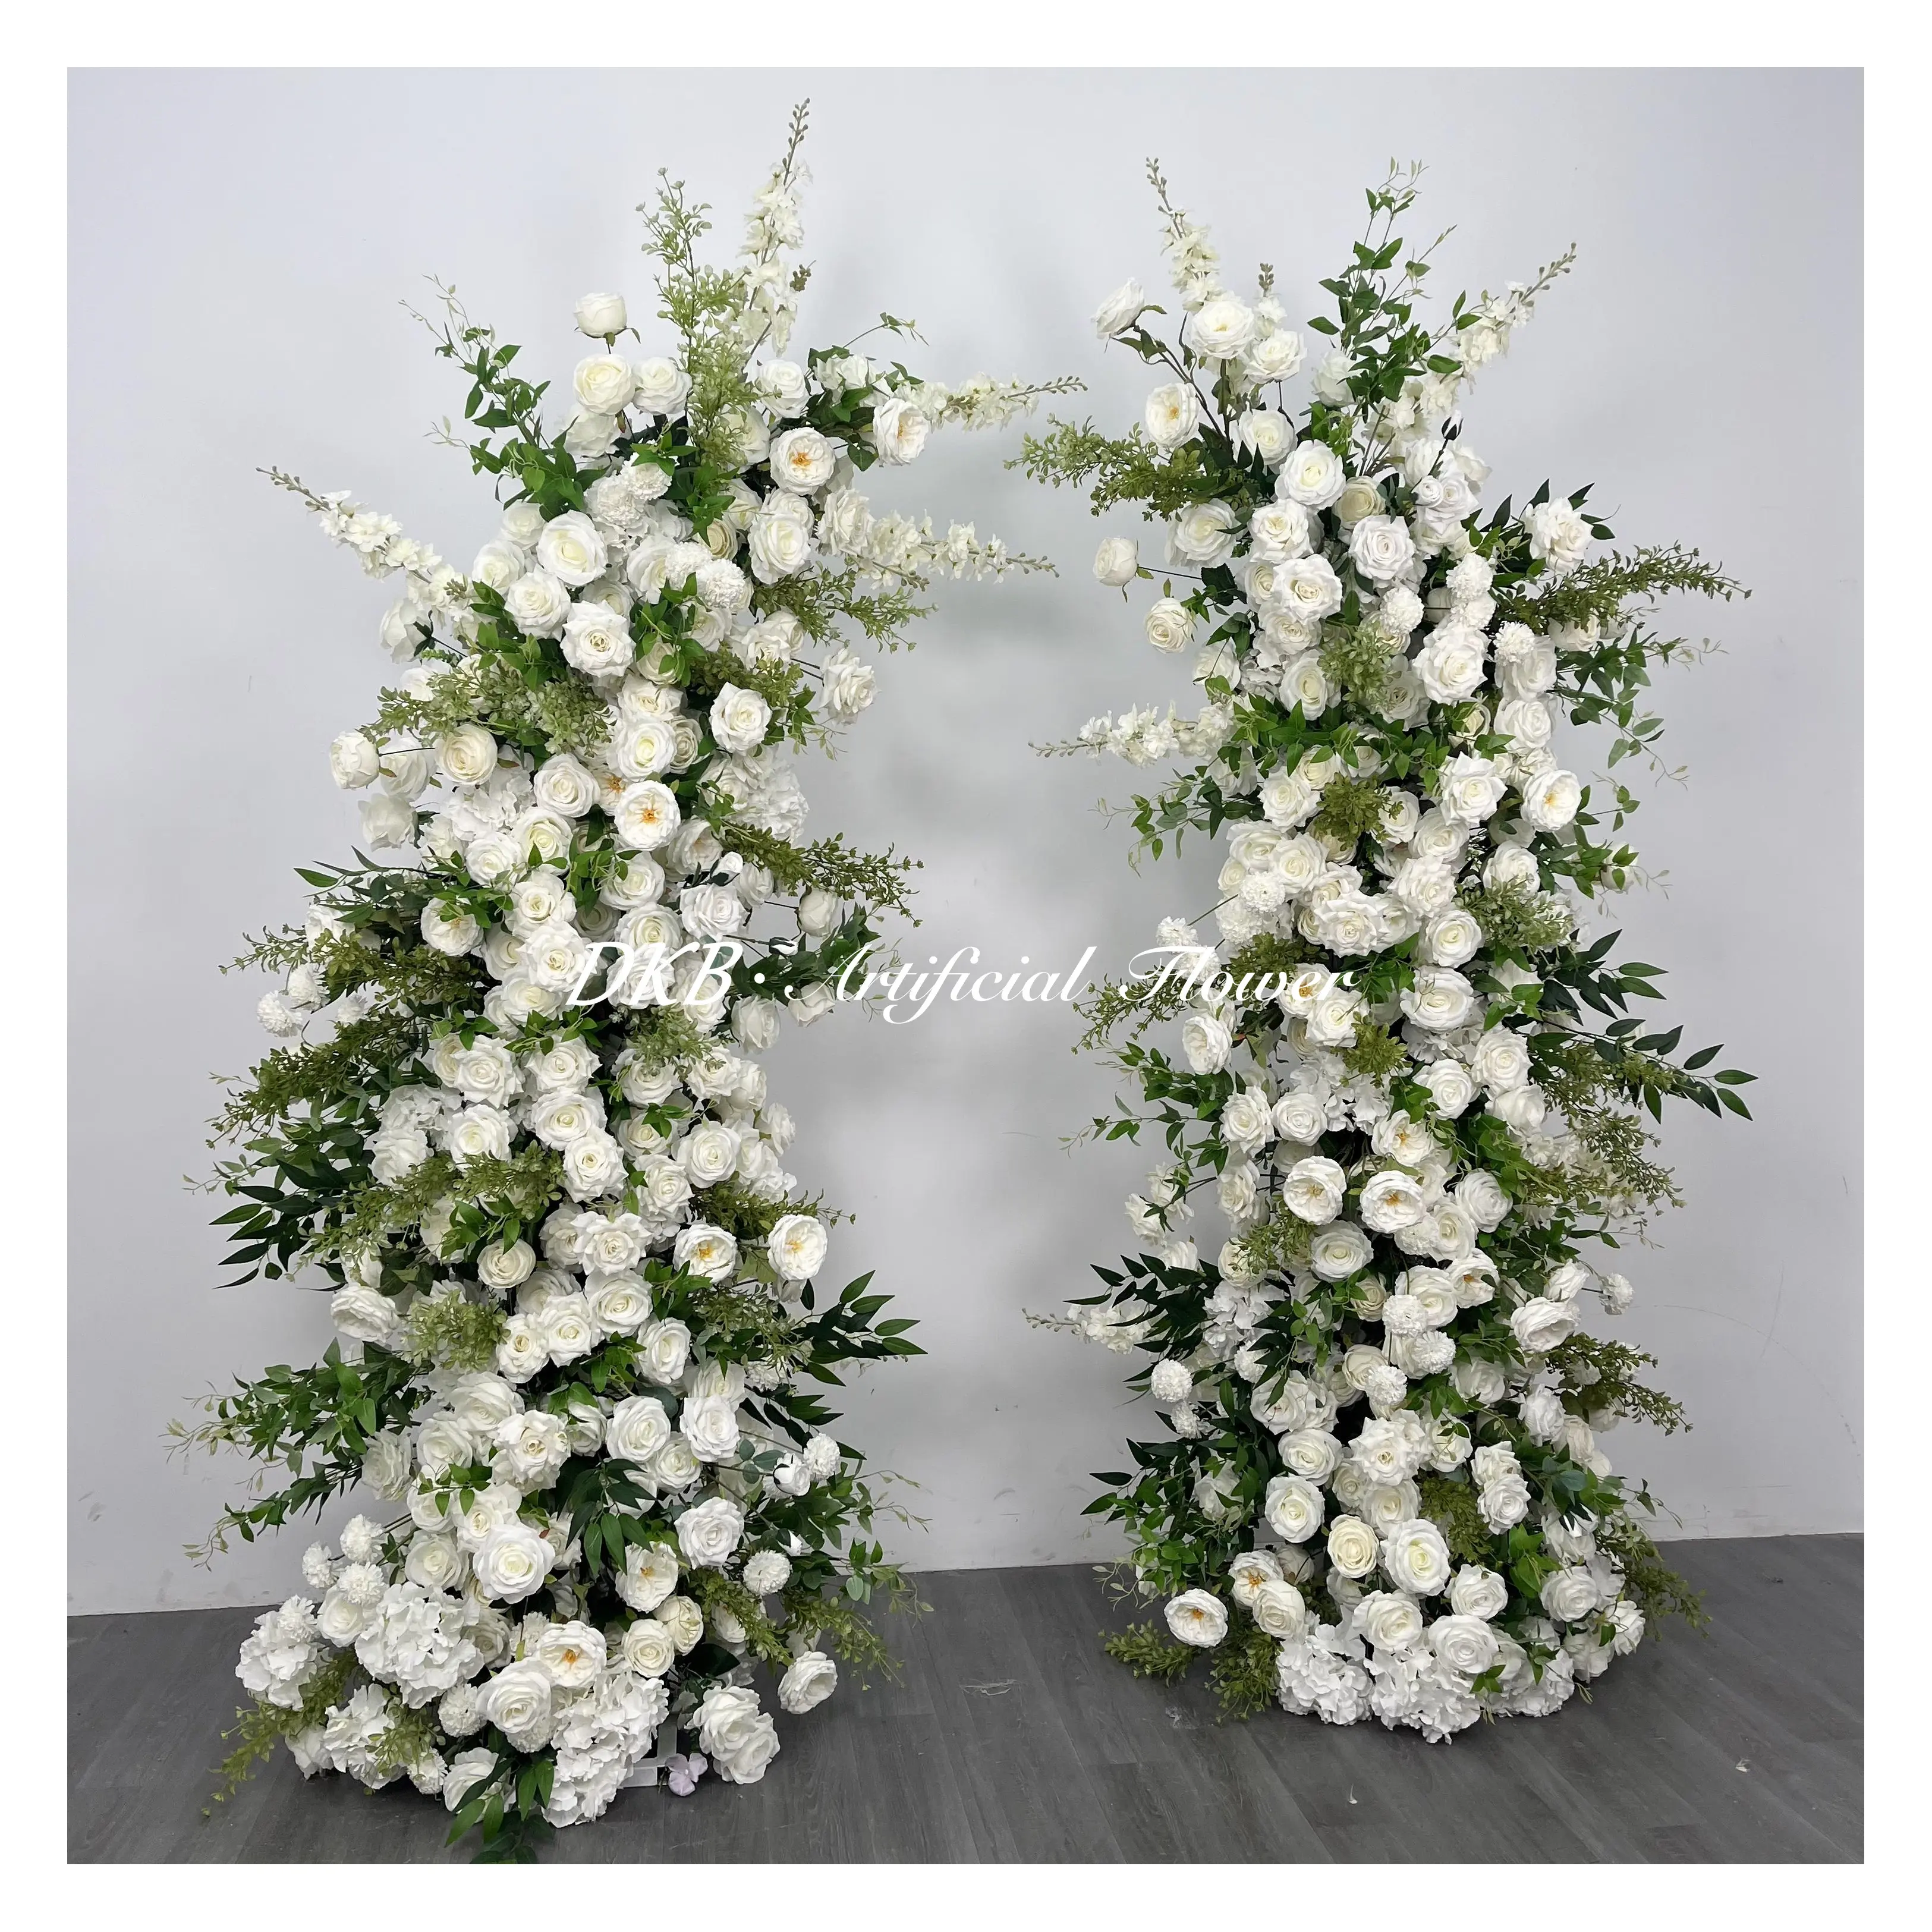 wholesale Backdrop Decor High Quality silk rose white green backdrops for wedding events stage decorations